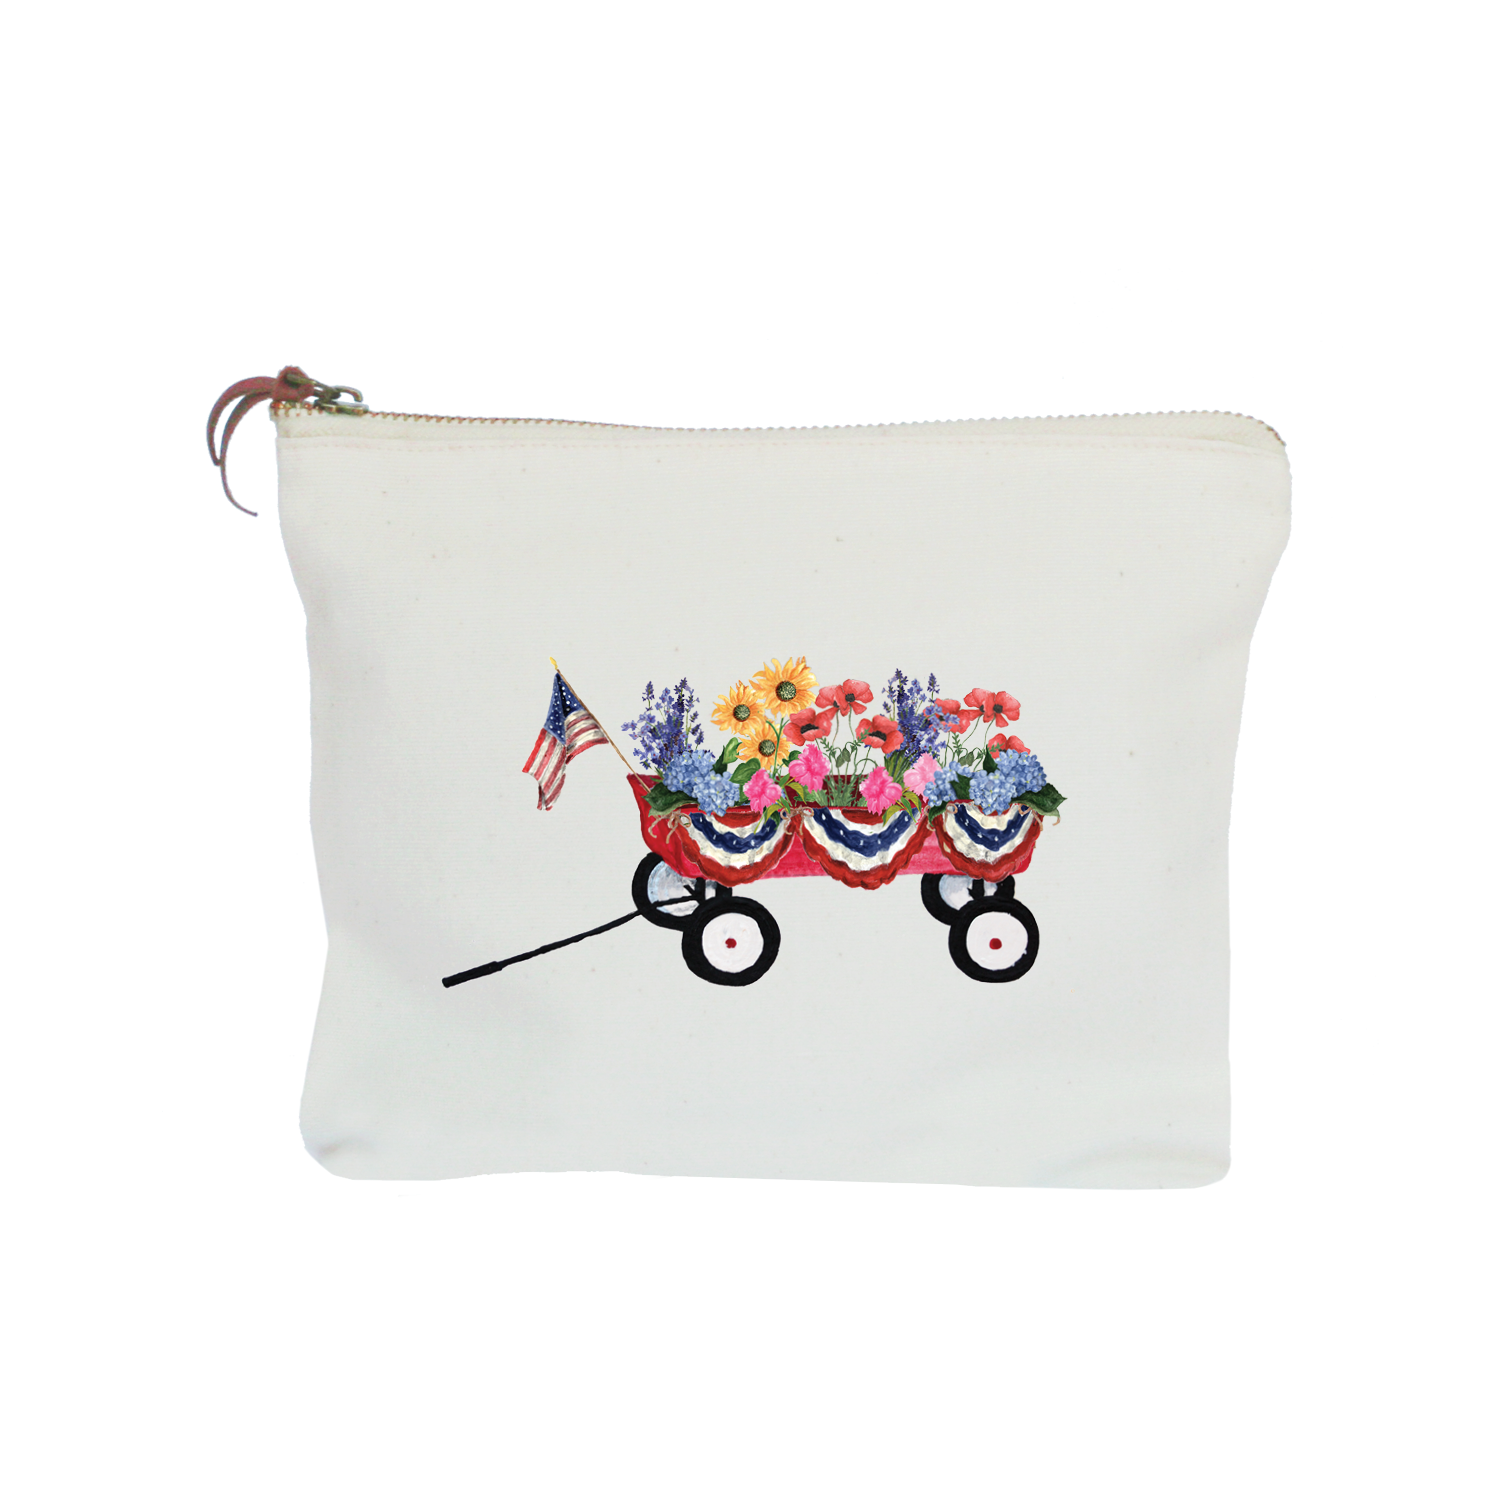 wagon with flowers zipper pouch